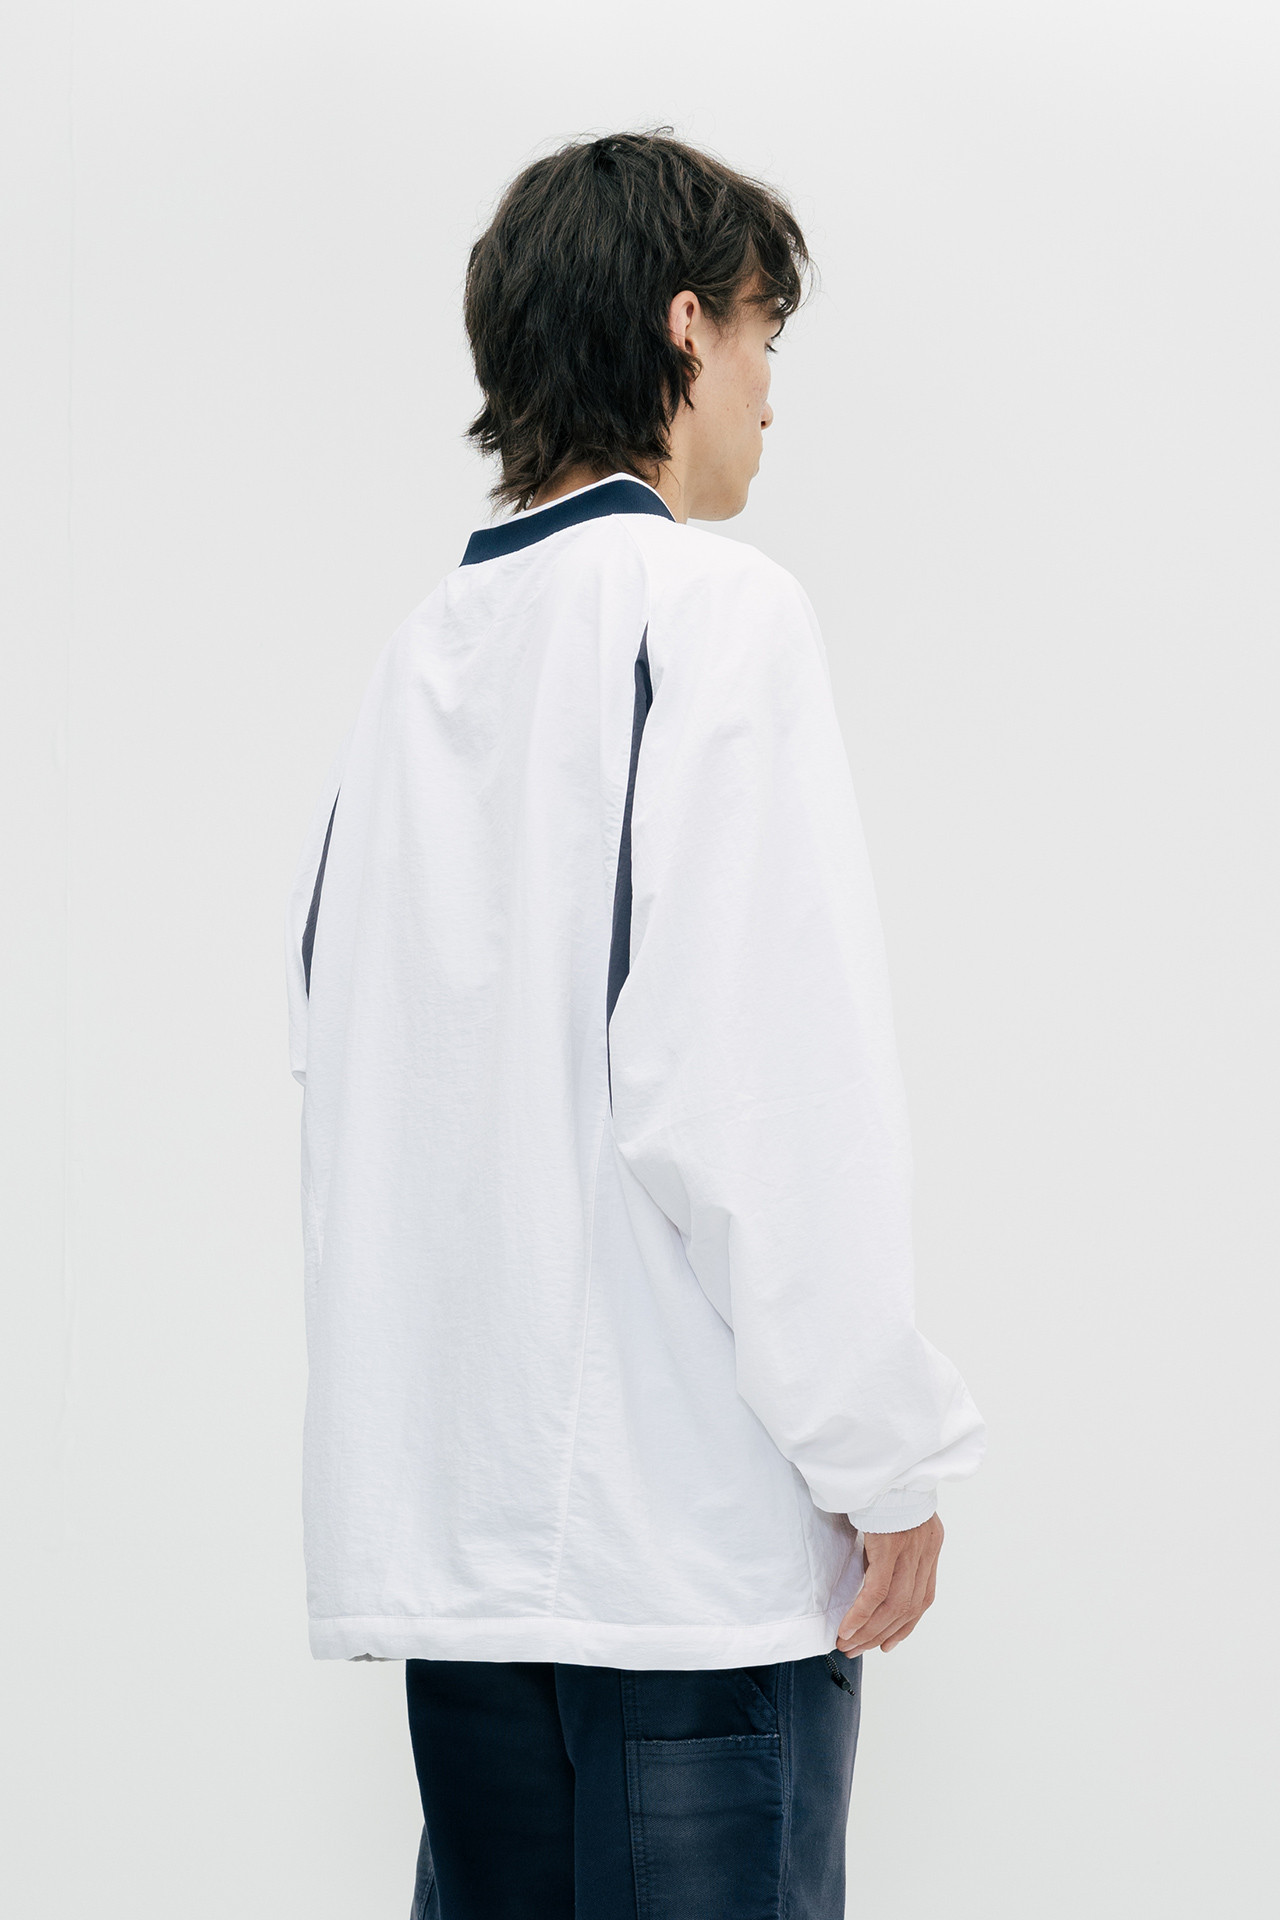 Martine Rose Sports Pullover White/Navy - Calico Club